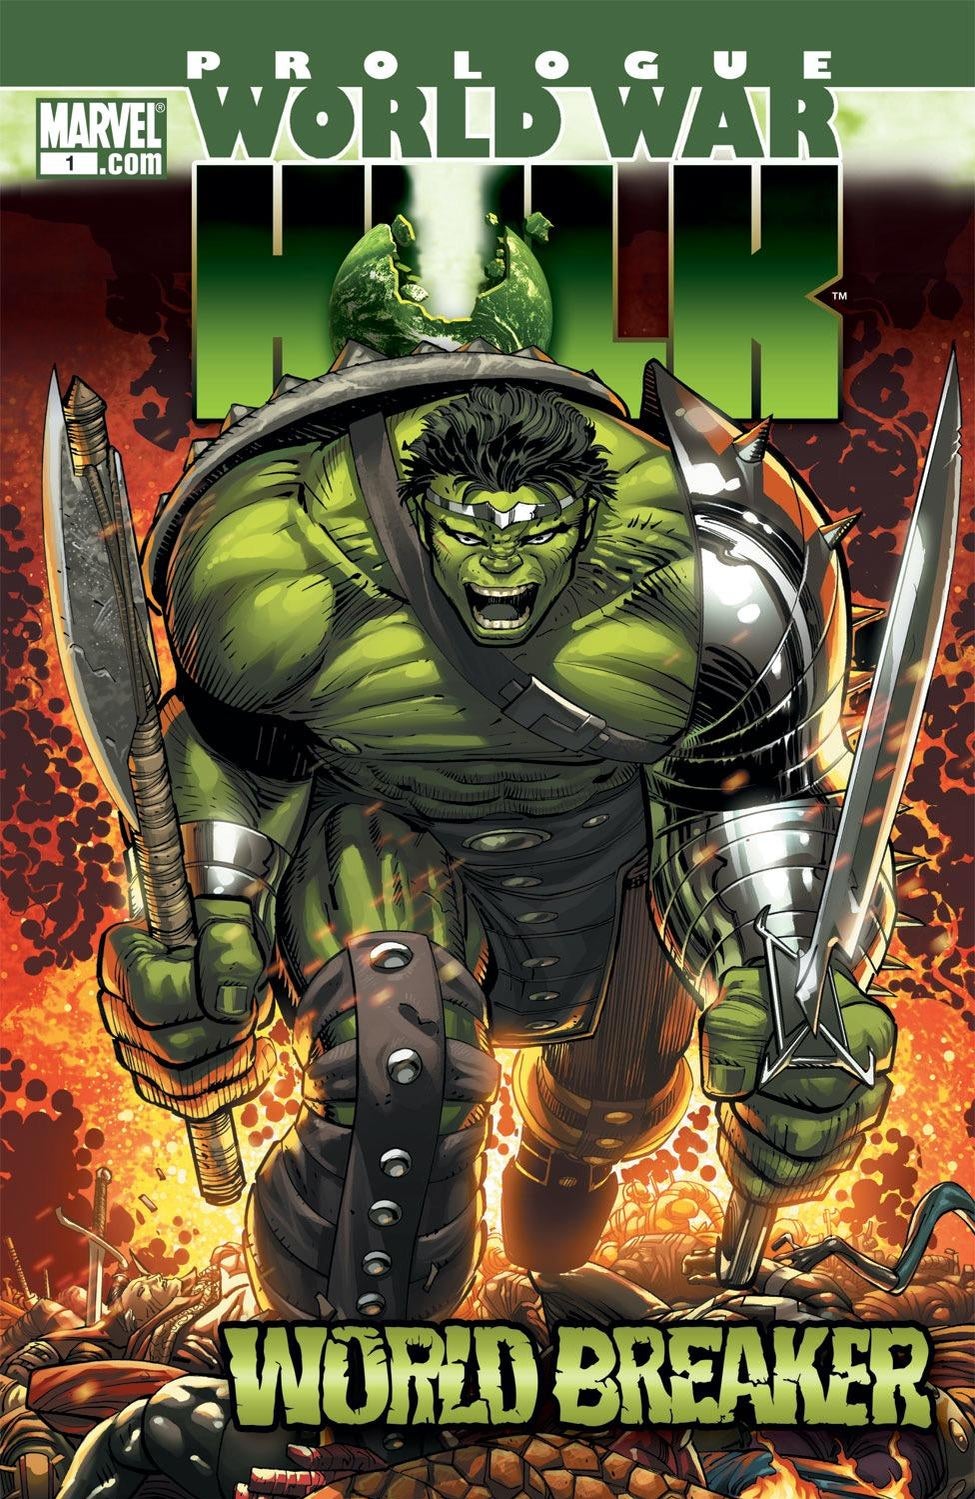 She-Hulk Episode 2 Sets Up a Planet Hulk Solo Movie – The